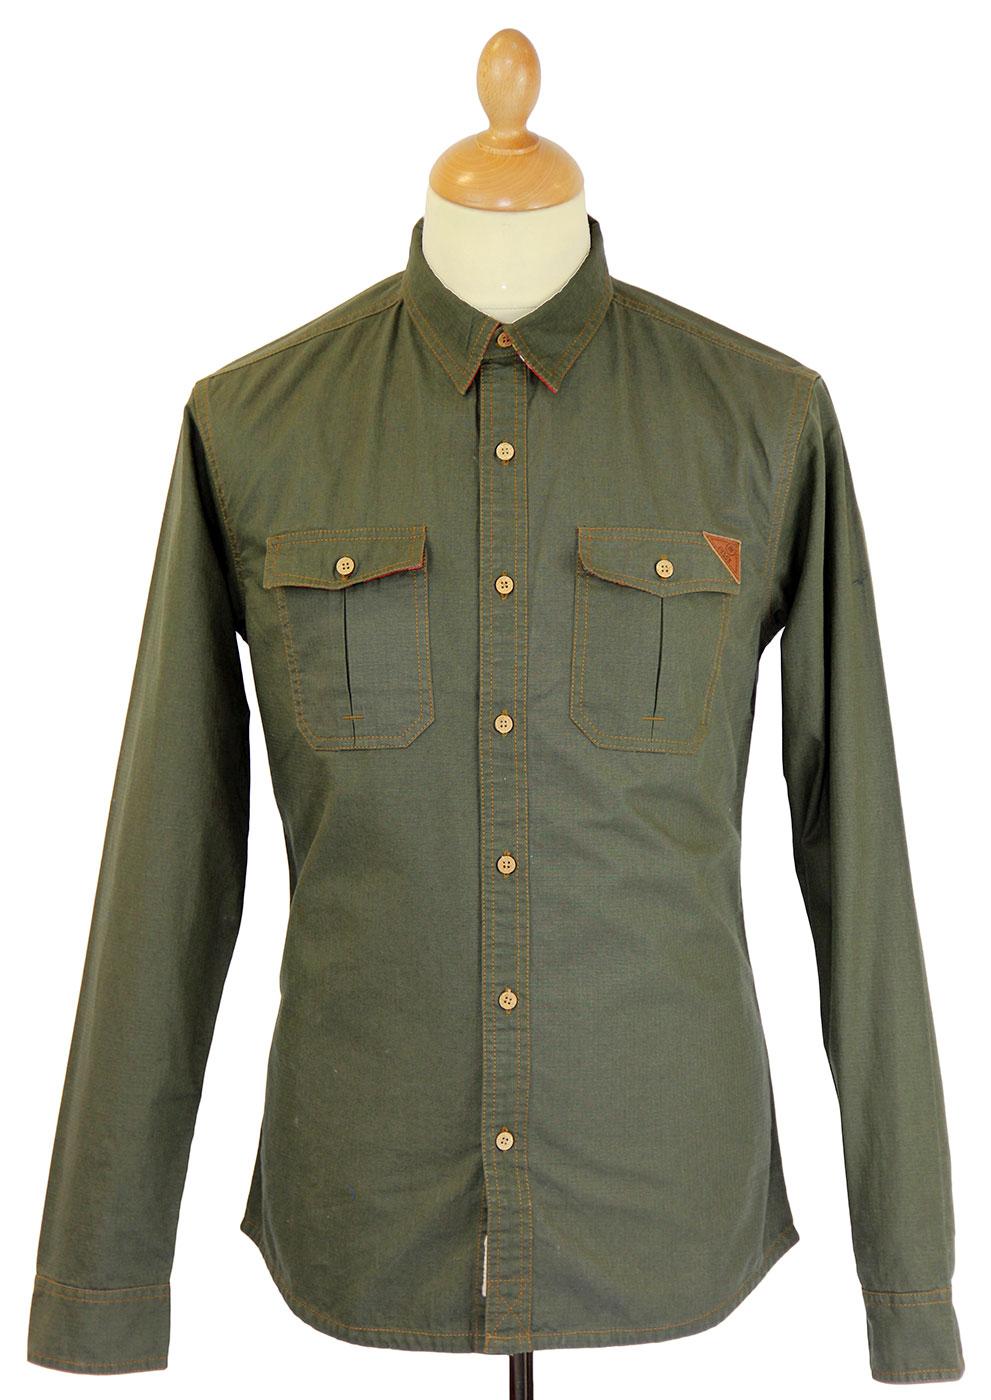 FLY53 Wraith Retro Indie Mod Military Rip Stop Shirt in Olive